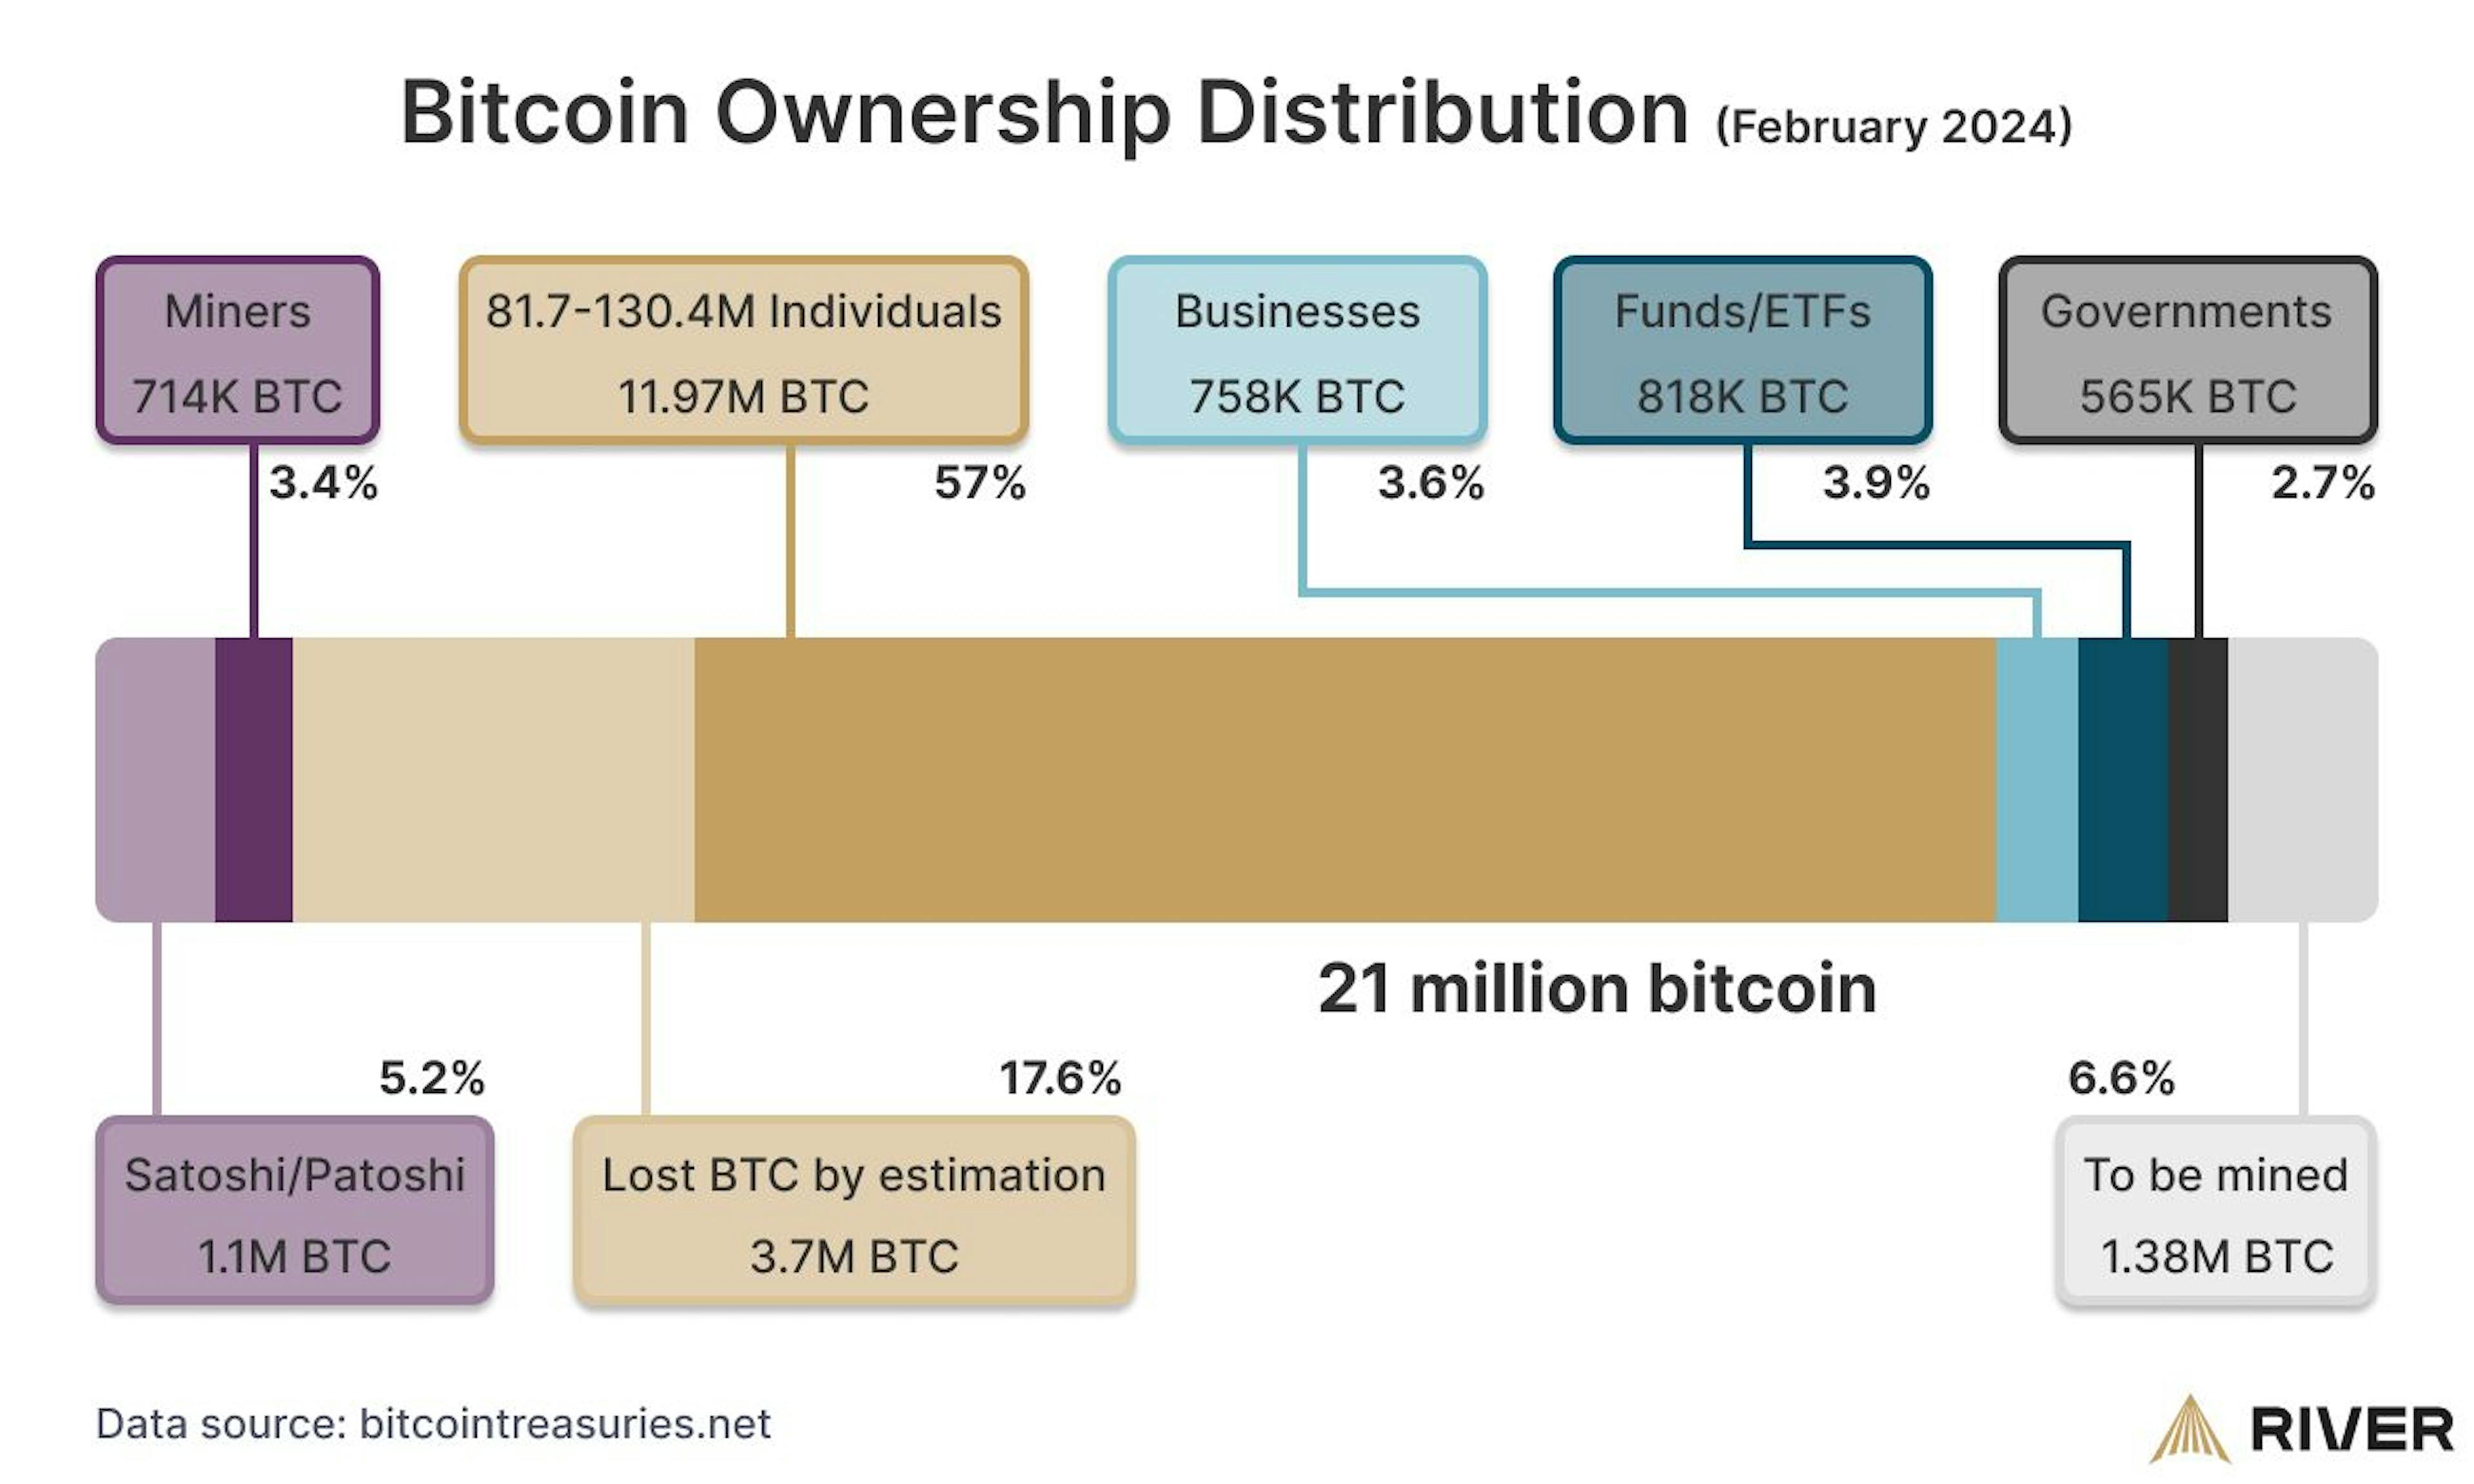 Who owns Bitcoin? You and I own Bitcoin.